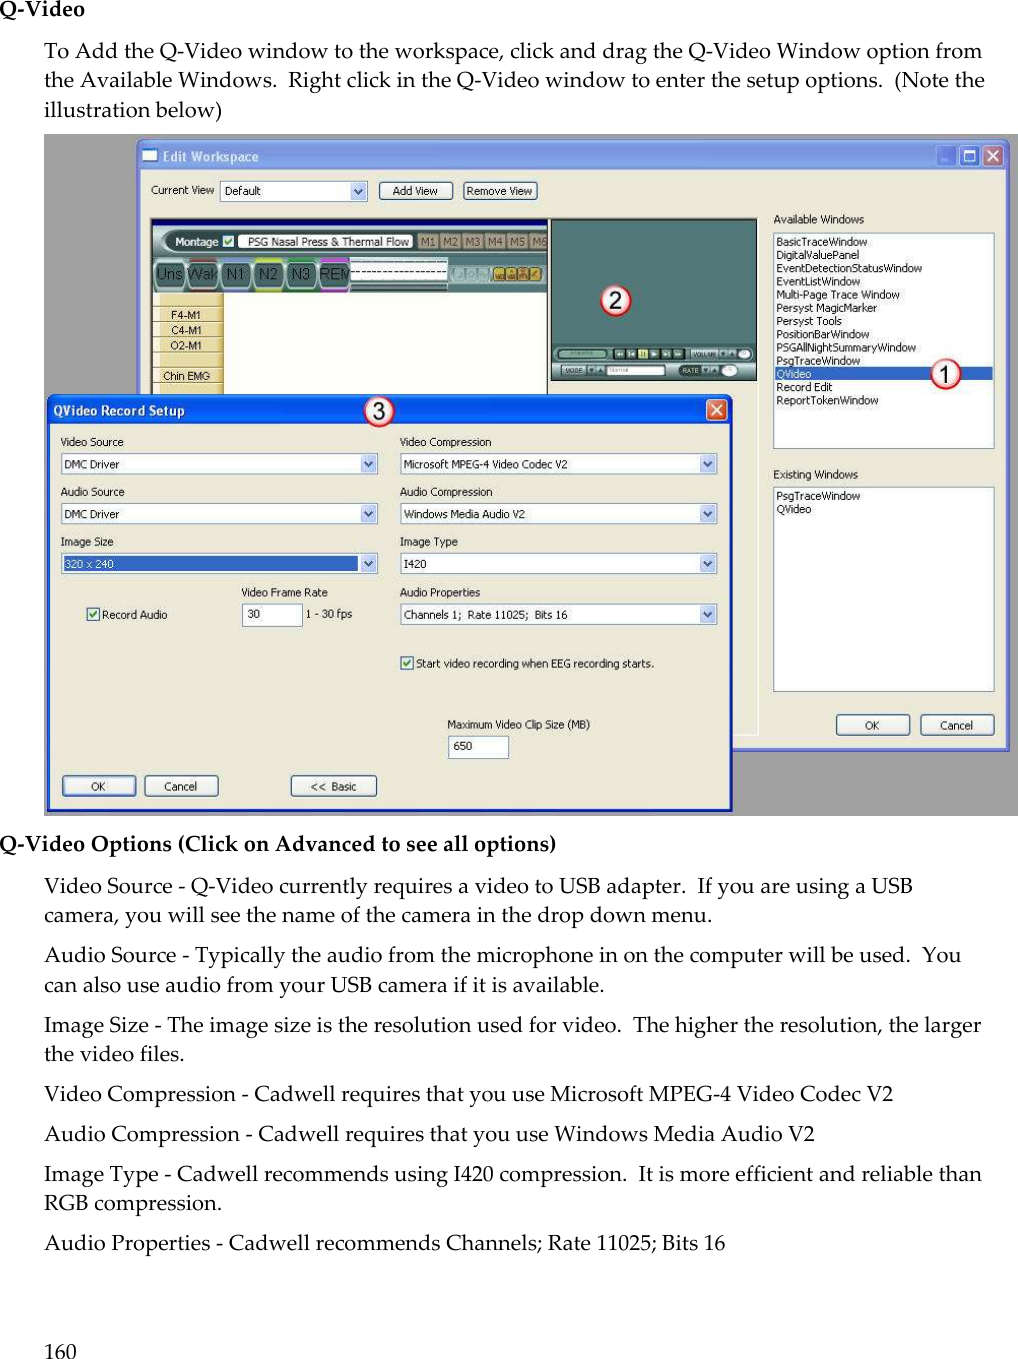 160  Q-Video To Add the Q-Video window to the workspace, click and drag the Q-Video Window option from the Available Windows.  Right click in the Q-Video window to enter the setup options.  (Note the illustration below)  Q-Video Options (Click on Advanced to see all options) Video Source - Q-Video currently requires a video to USB adapter.  If you are using a USB camera, you will see the name of the camera in the drop down menu. Audio Source - Typically the audio from the microphone in on the computer will be used.  You can also use audio from your USB camera if it is available. Image Size - The image size is the resolution used for video.  The higher the resolution, the larger the video files. Video Compression - Cadwell requires that you use Microsoft MPEG-4 Video Codec V2 Audio Compression - Cadwell requires that you use Windows Media Audio V2 Image Type - Cadwell recommends using I420 compression.  It is more efficient and reliable than RGB compression. Audio Properties - Cadwell recommends Channels; Rate 11025; Bits 16 